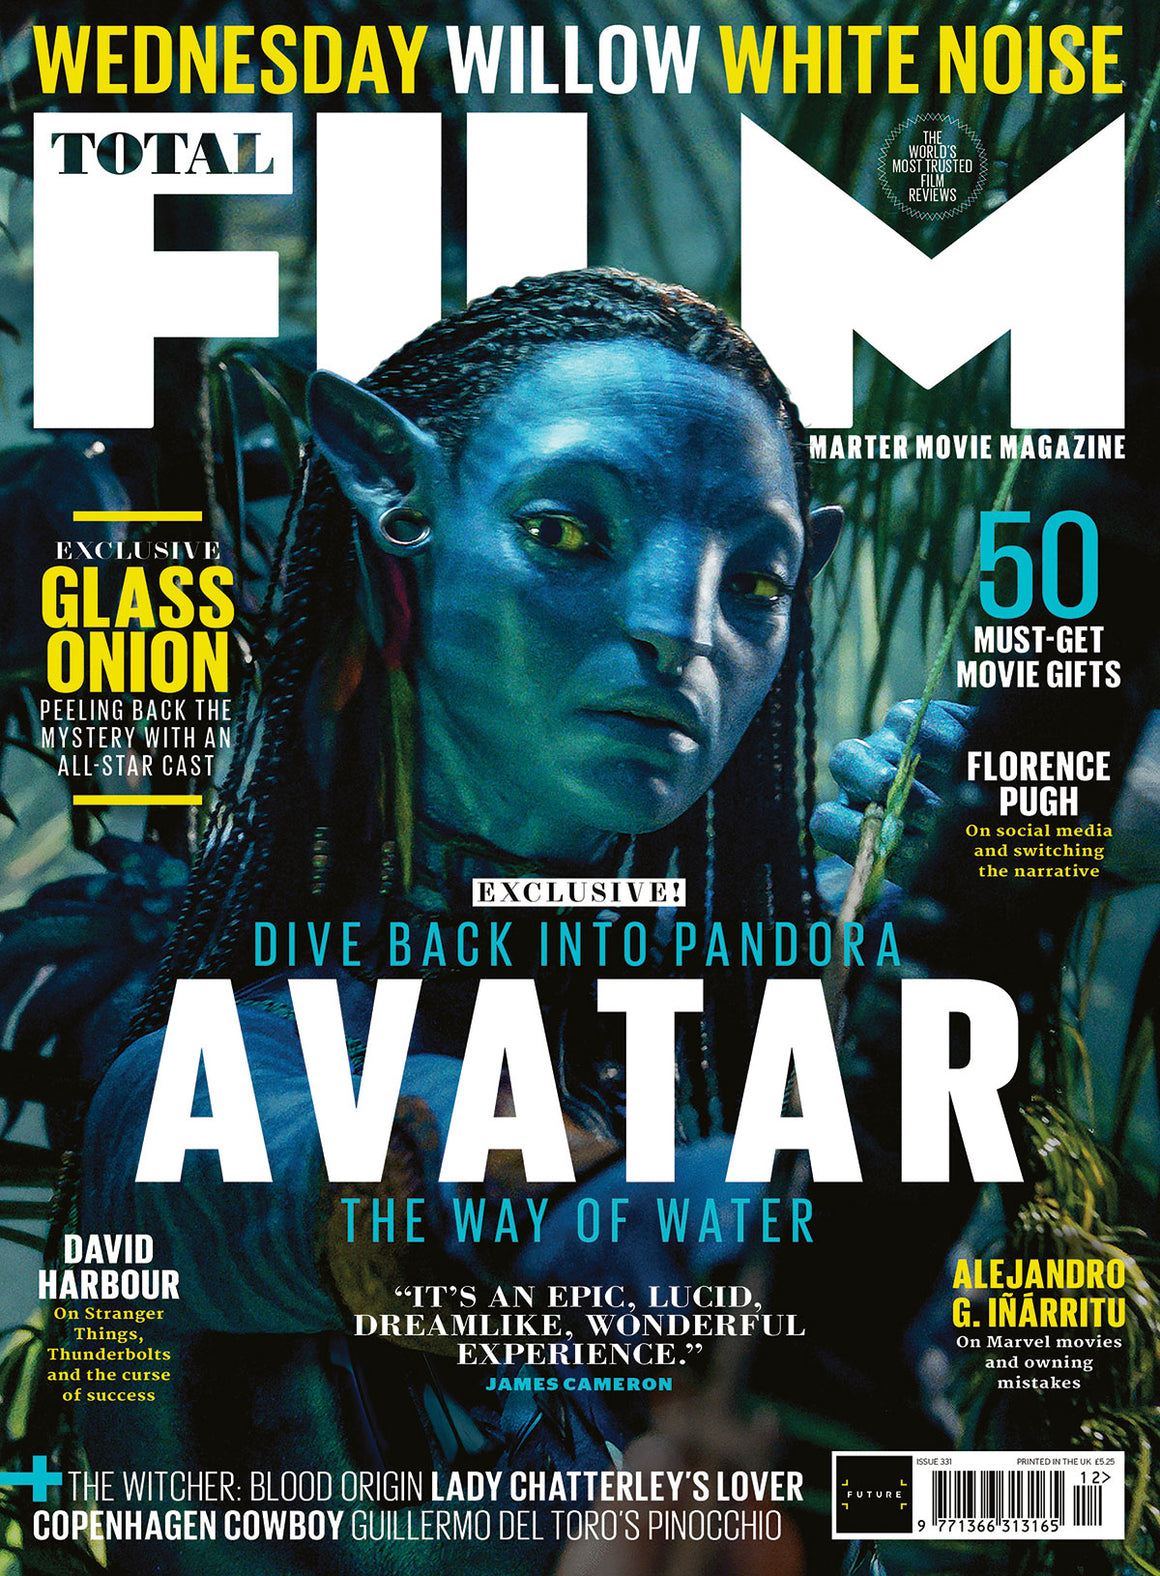 TOTAL FILM Magazine #331 AVATAR - THE WAY OF THE WATER WORLD EXCLUSIVE